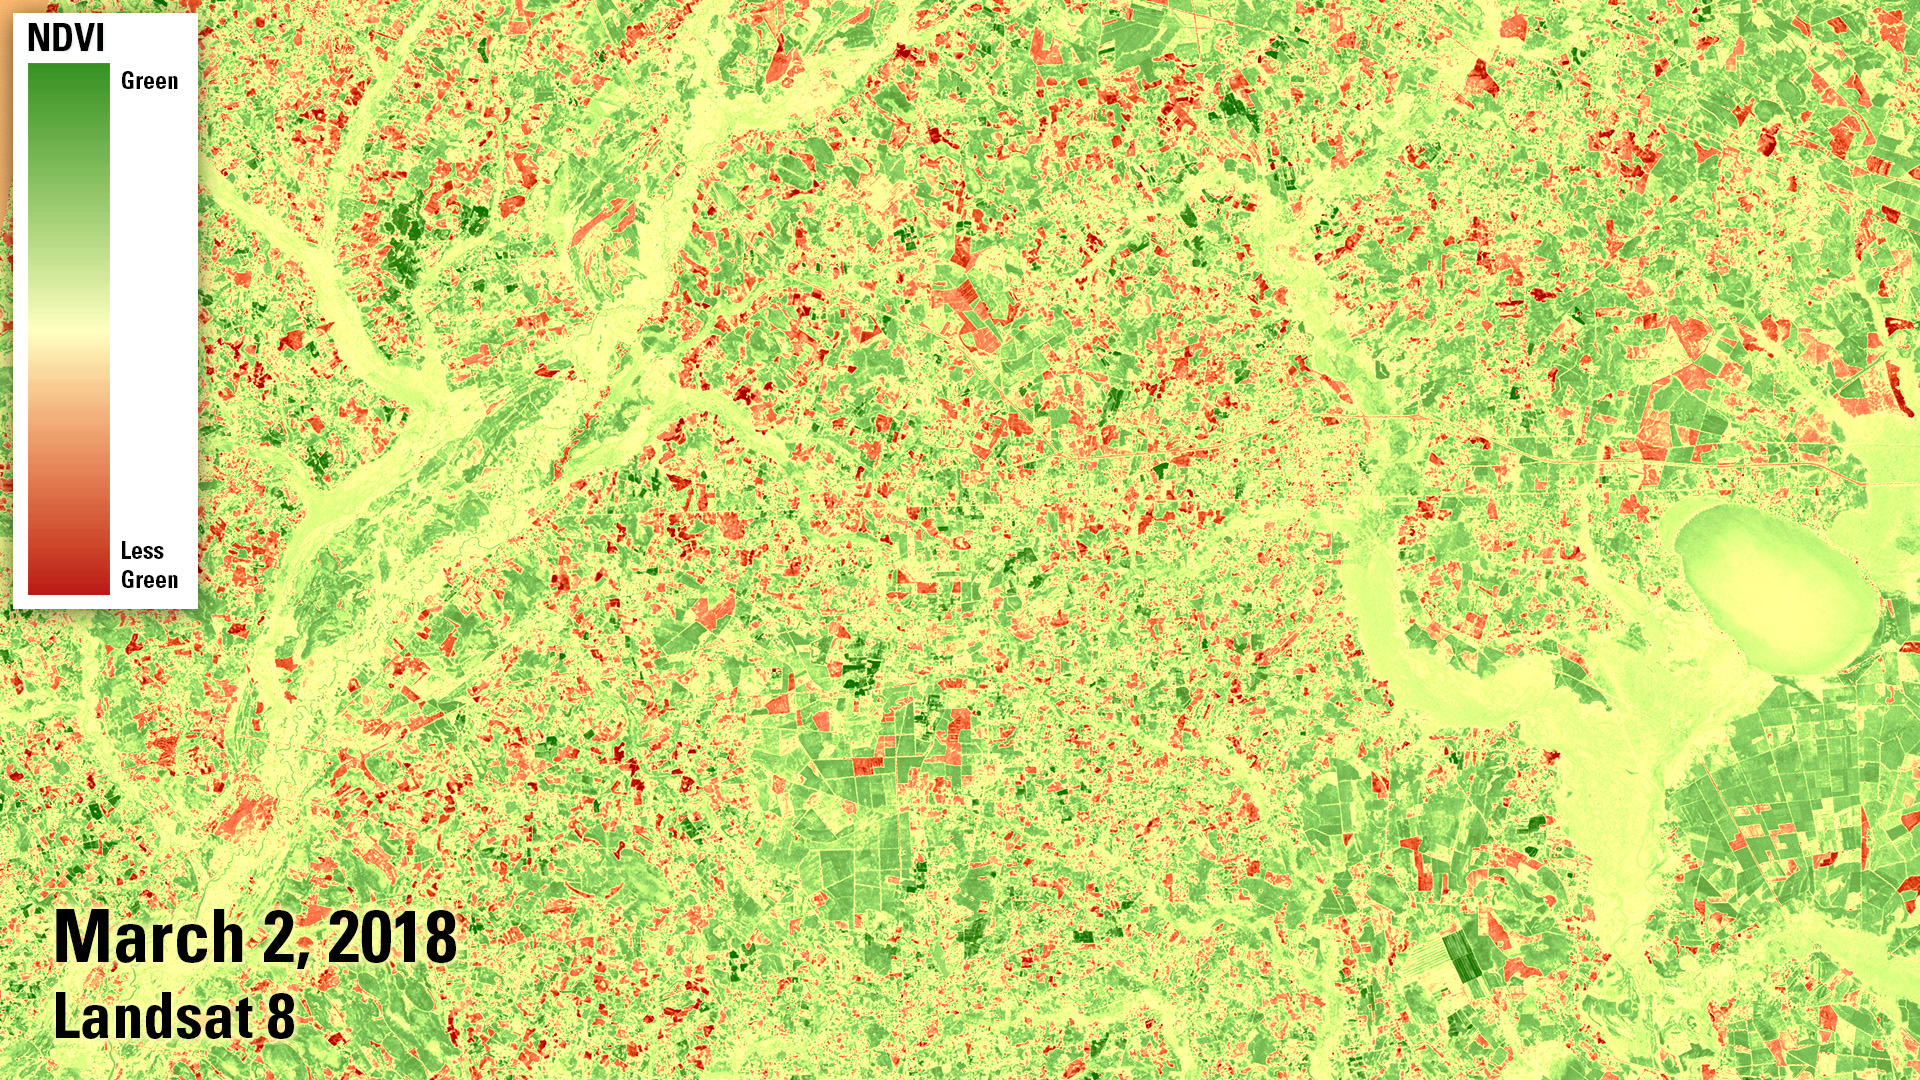 NDVI for March 2018